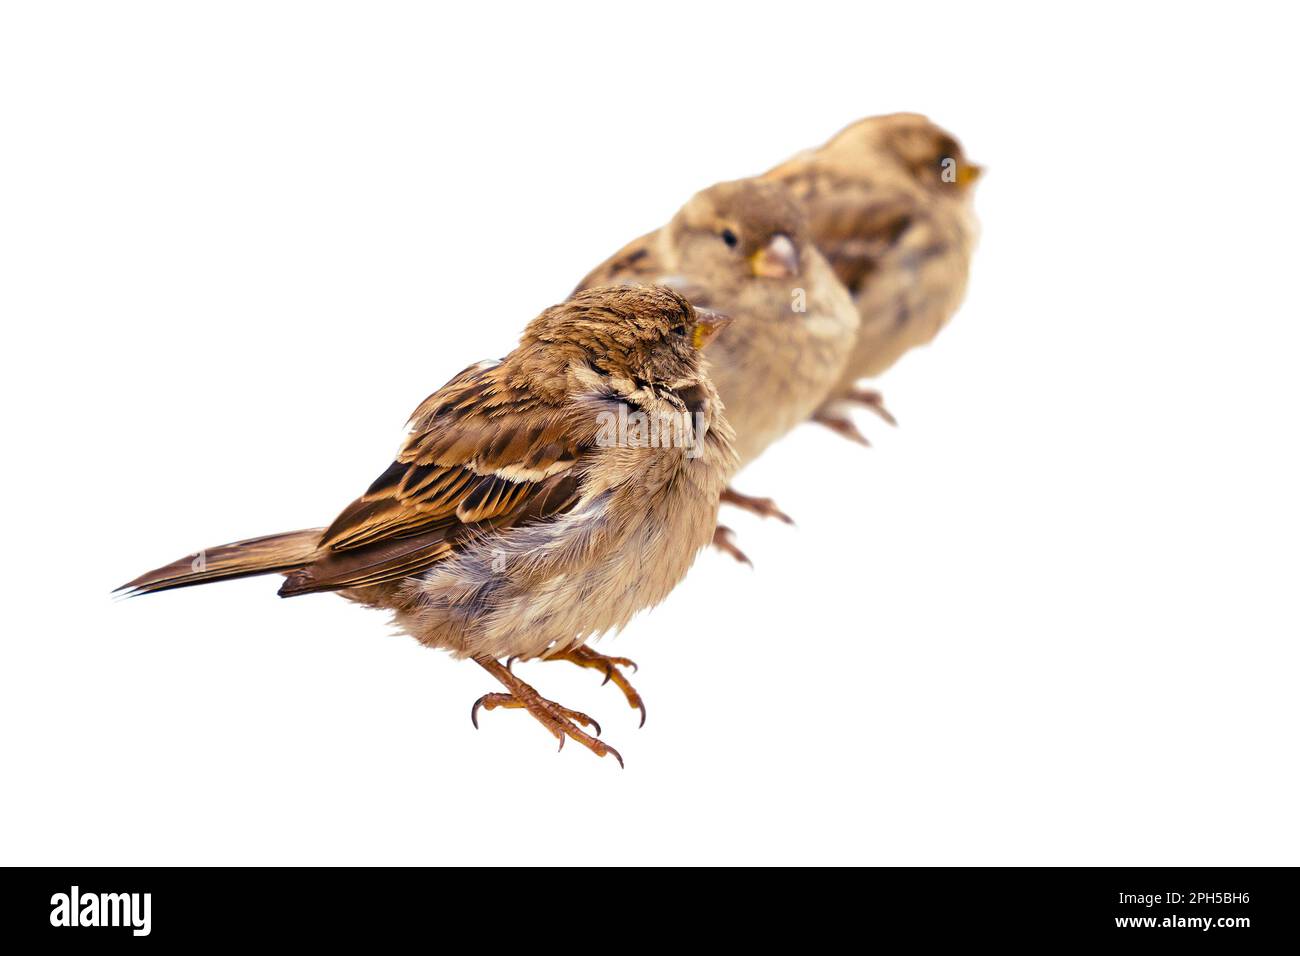 Sparrows sitting on furniture in an outdoor cafe, close-up, isolated on a white background Stock Photo